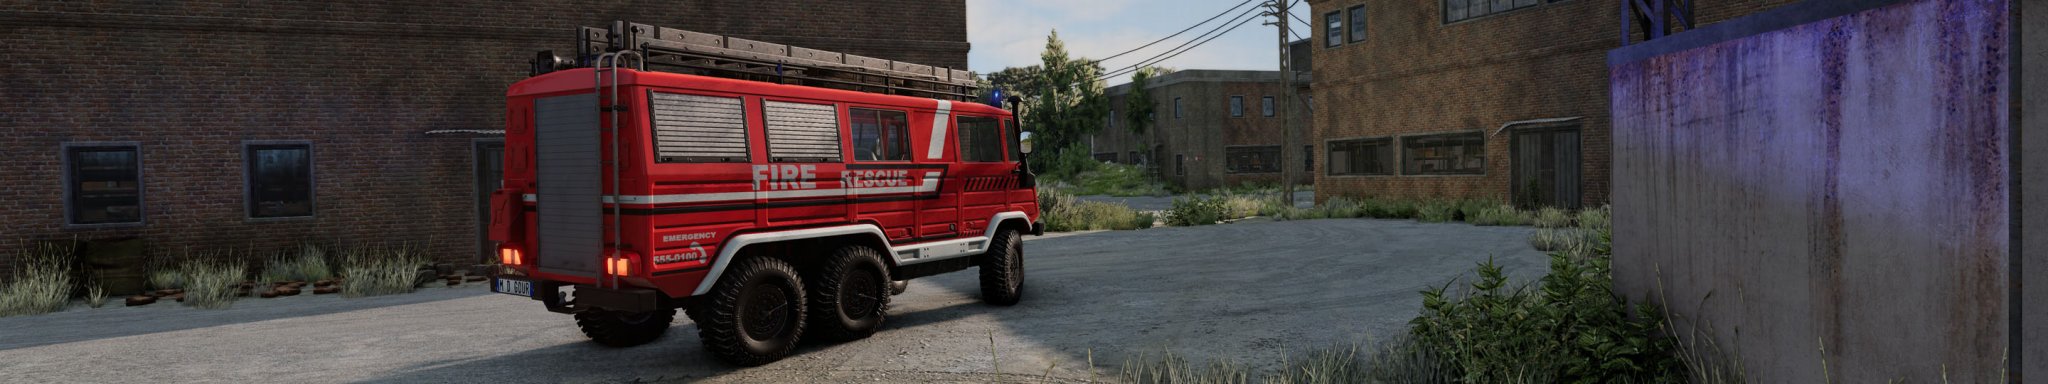 0 BeamNG STAMBECCO FP at INDUSTRIAL copy.jpg